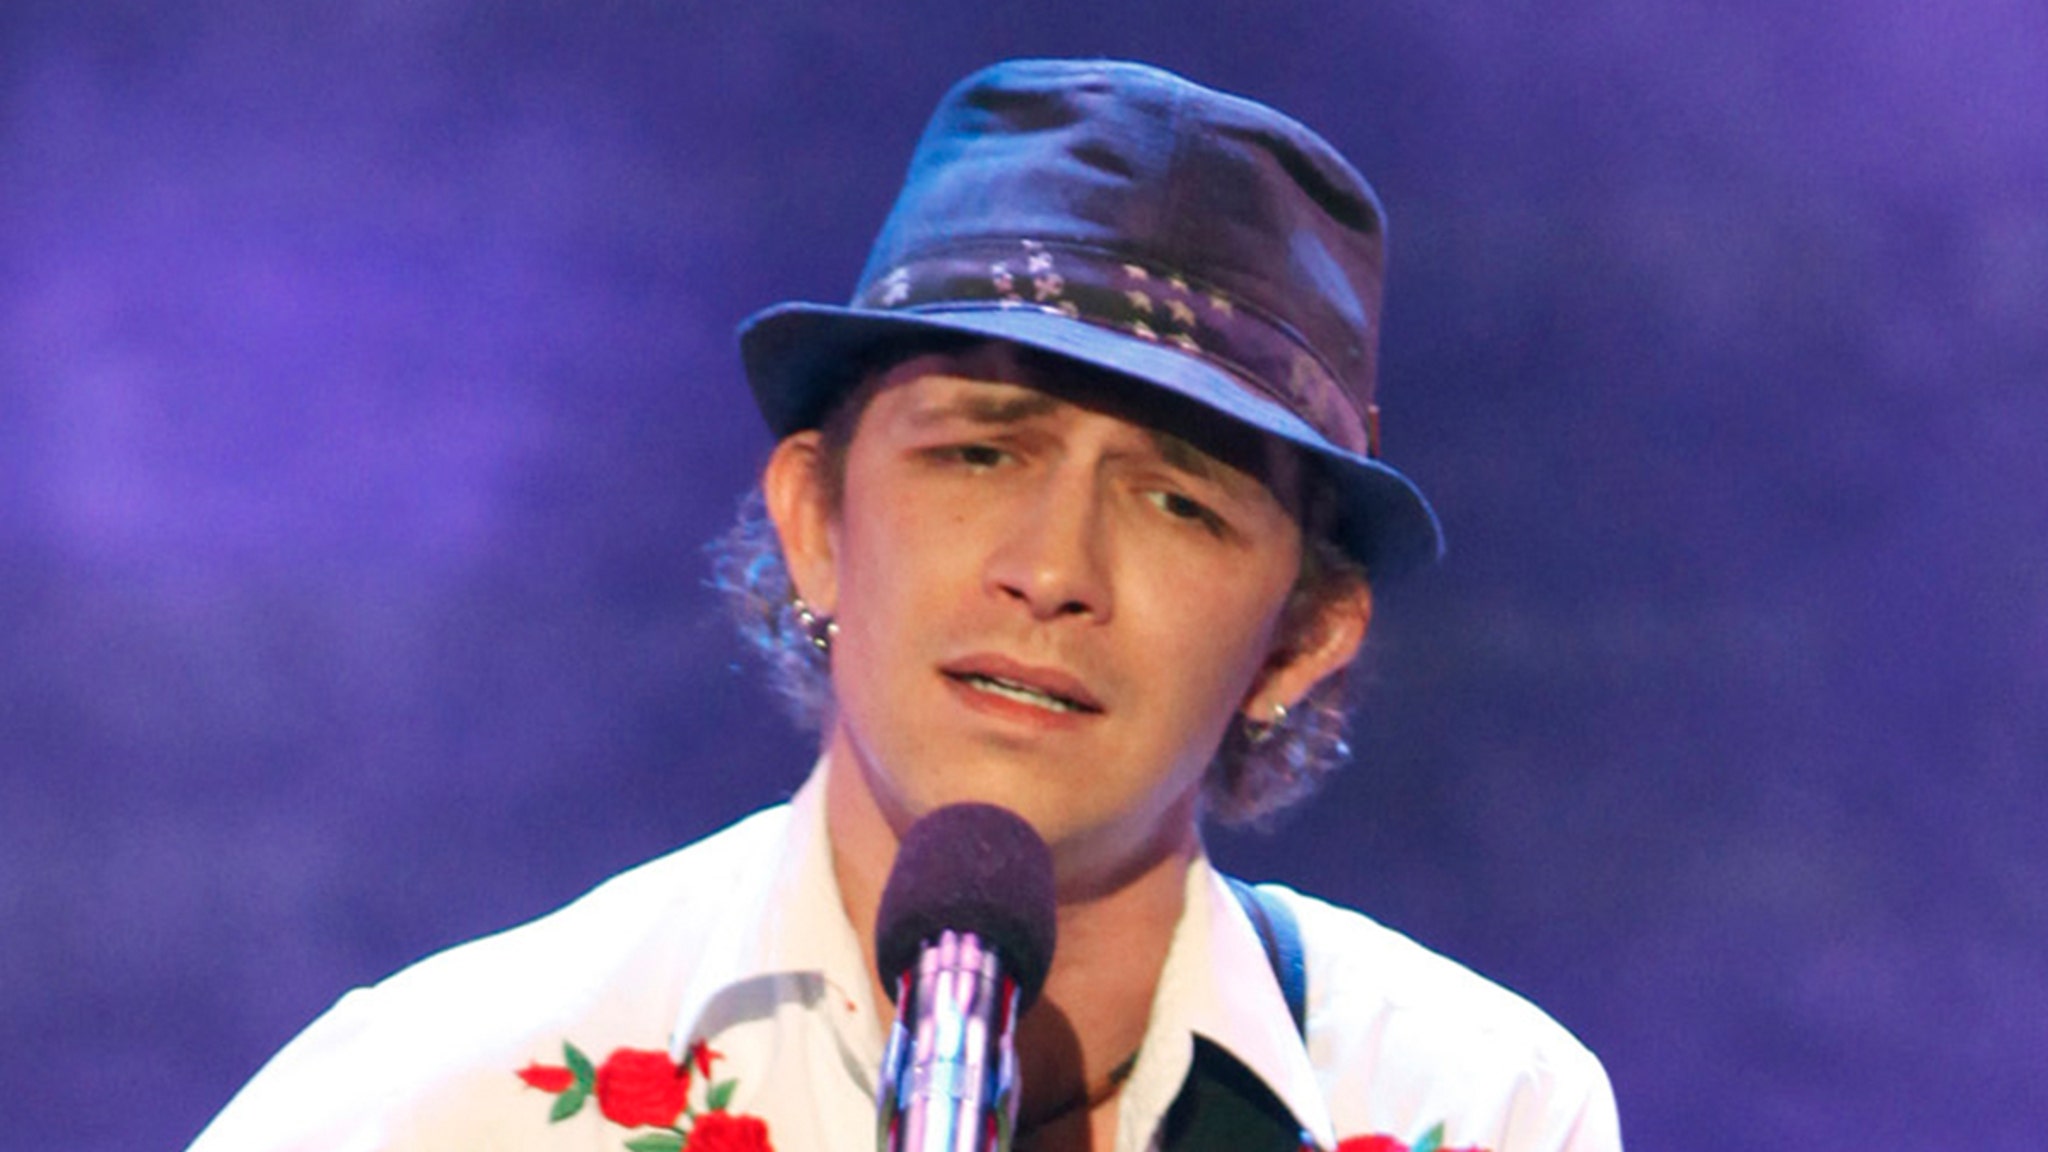 ‘America’s Got Talent’ winner Michael Grimm hospitalized, unconscious due to health issues